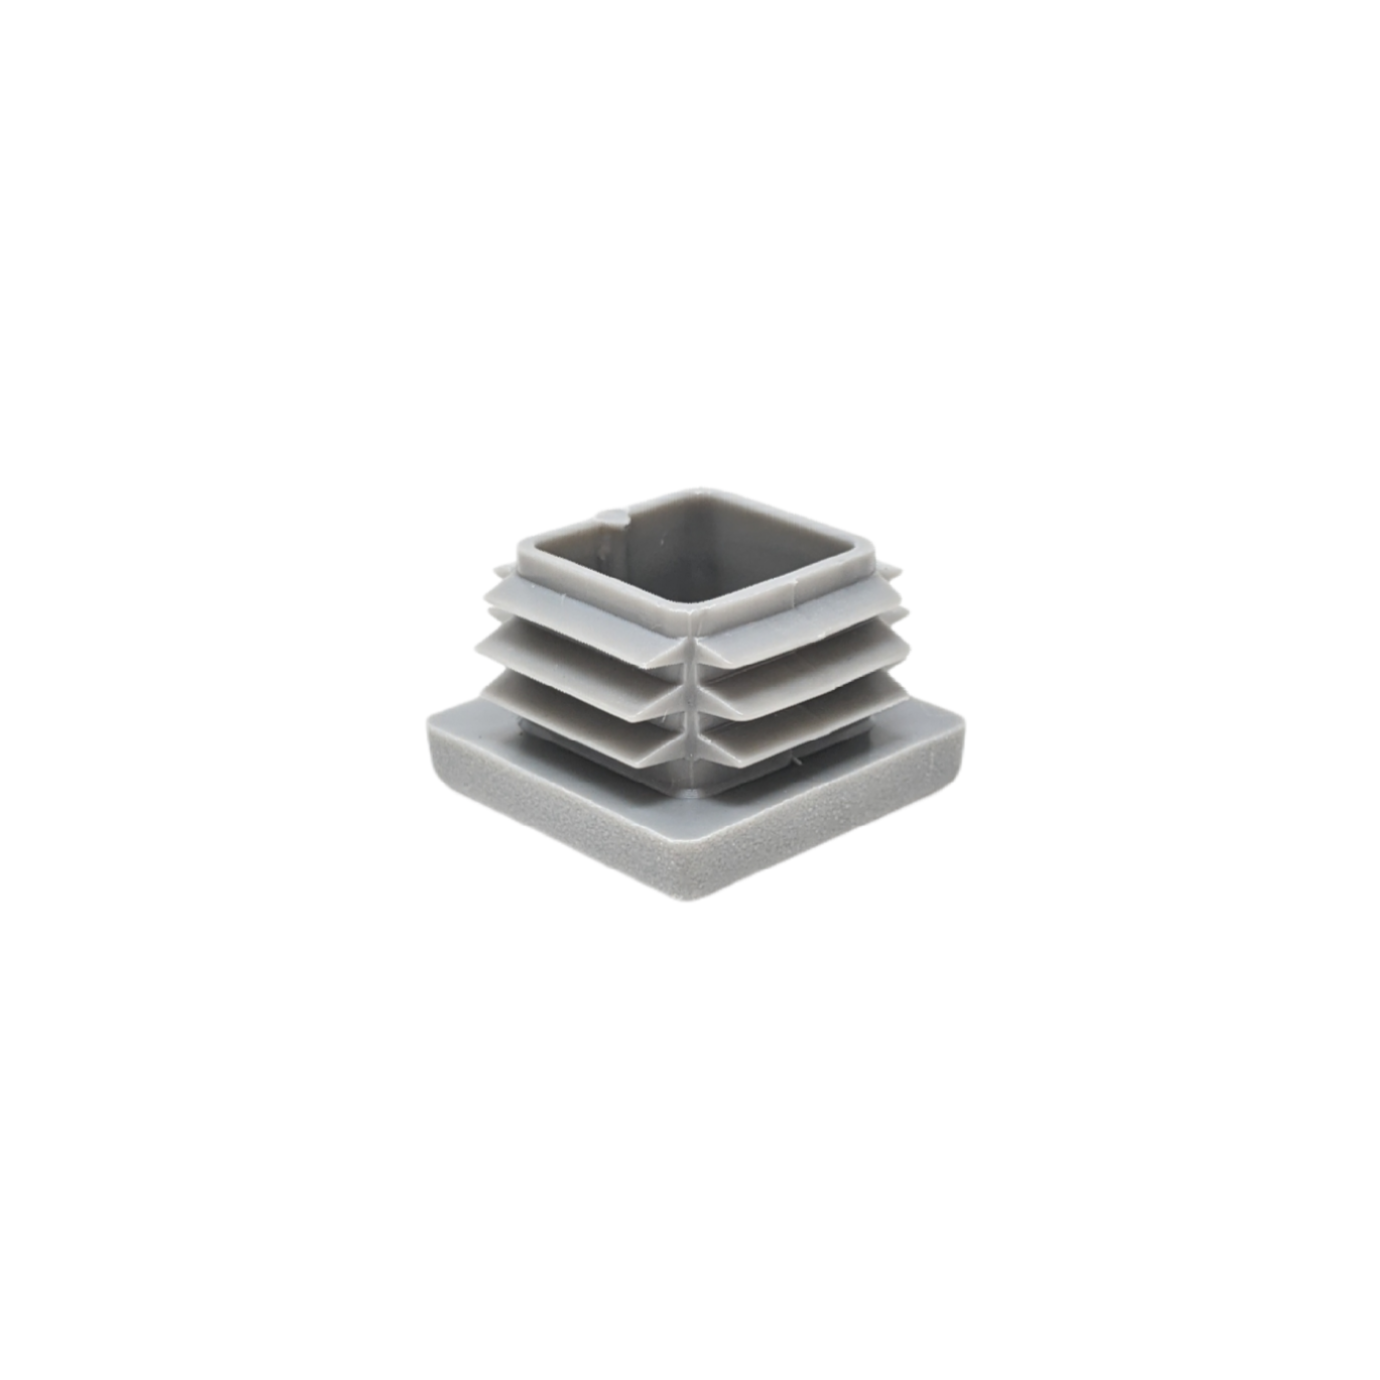 Square Tube Inserts 25mm x 25mm Grey | Made in Germany | Keay Vital Parts - Keay Vital Parts